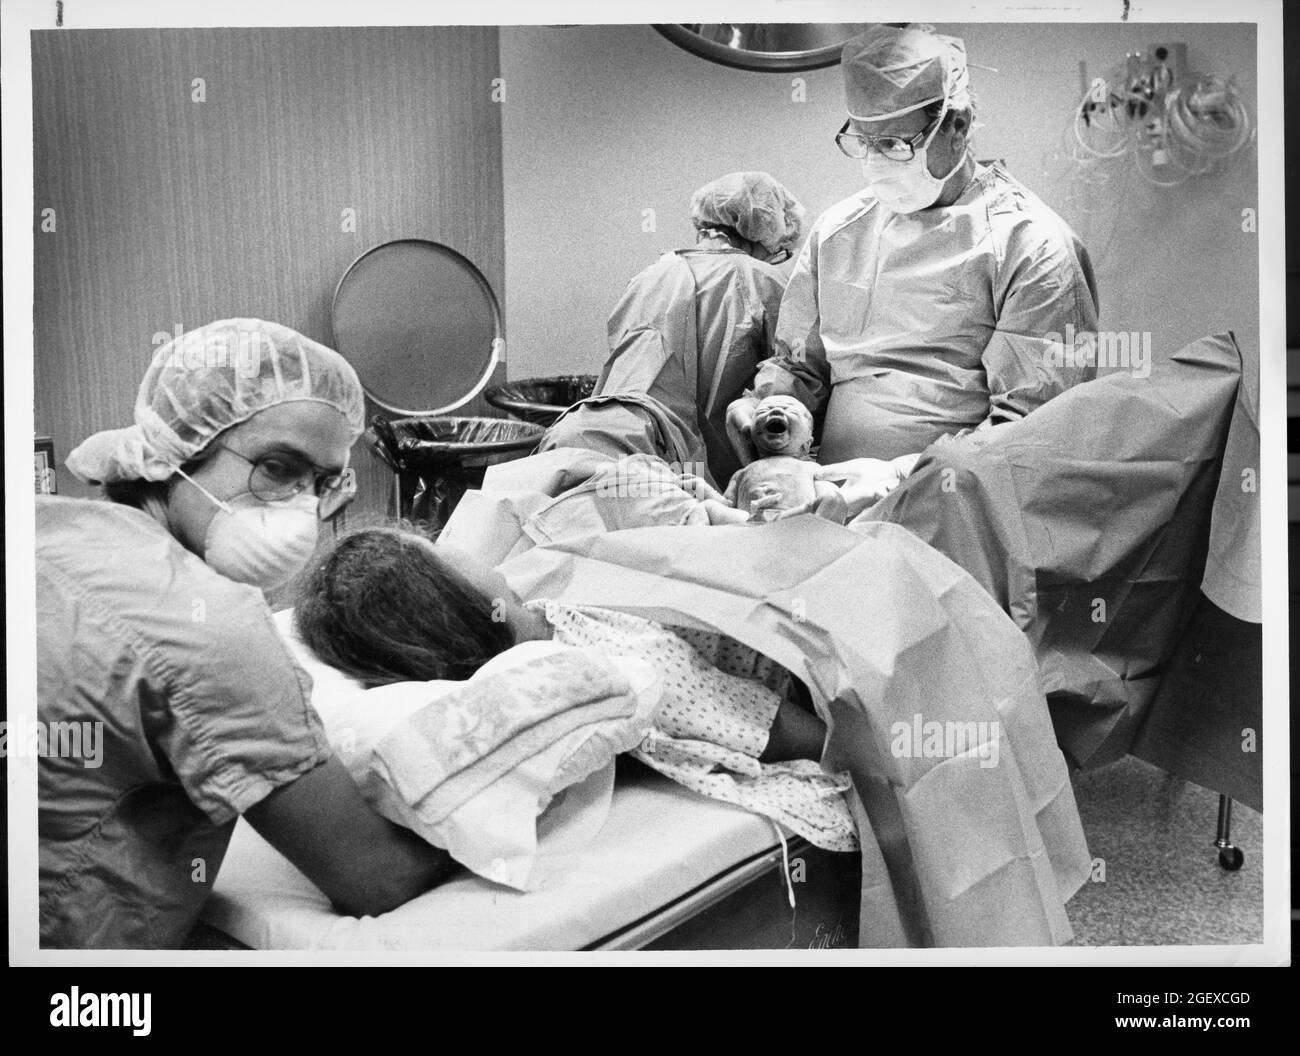 Austin Texas USA, 1982: Childbirth story that ran in the Austin American-Statesman in 1982..Obstetrician attends birth of woman's child in hospital labor-delivery room with labor-delivery nurses assisting. File 82-48 Box #12  birth was 6-2-1982. Stock Photo